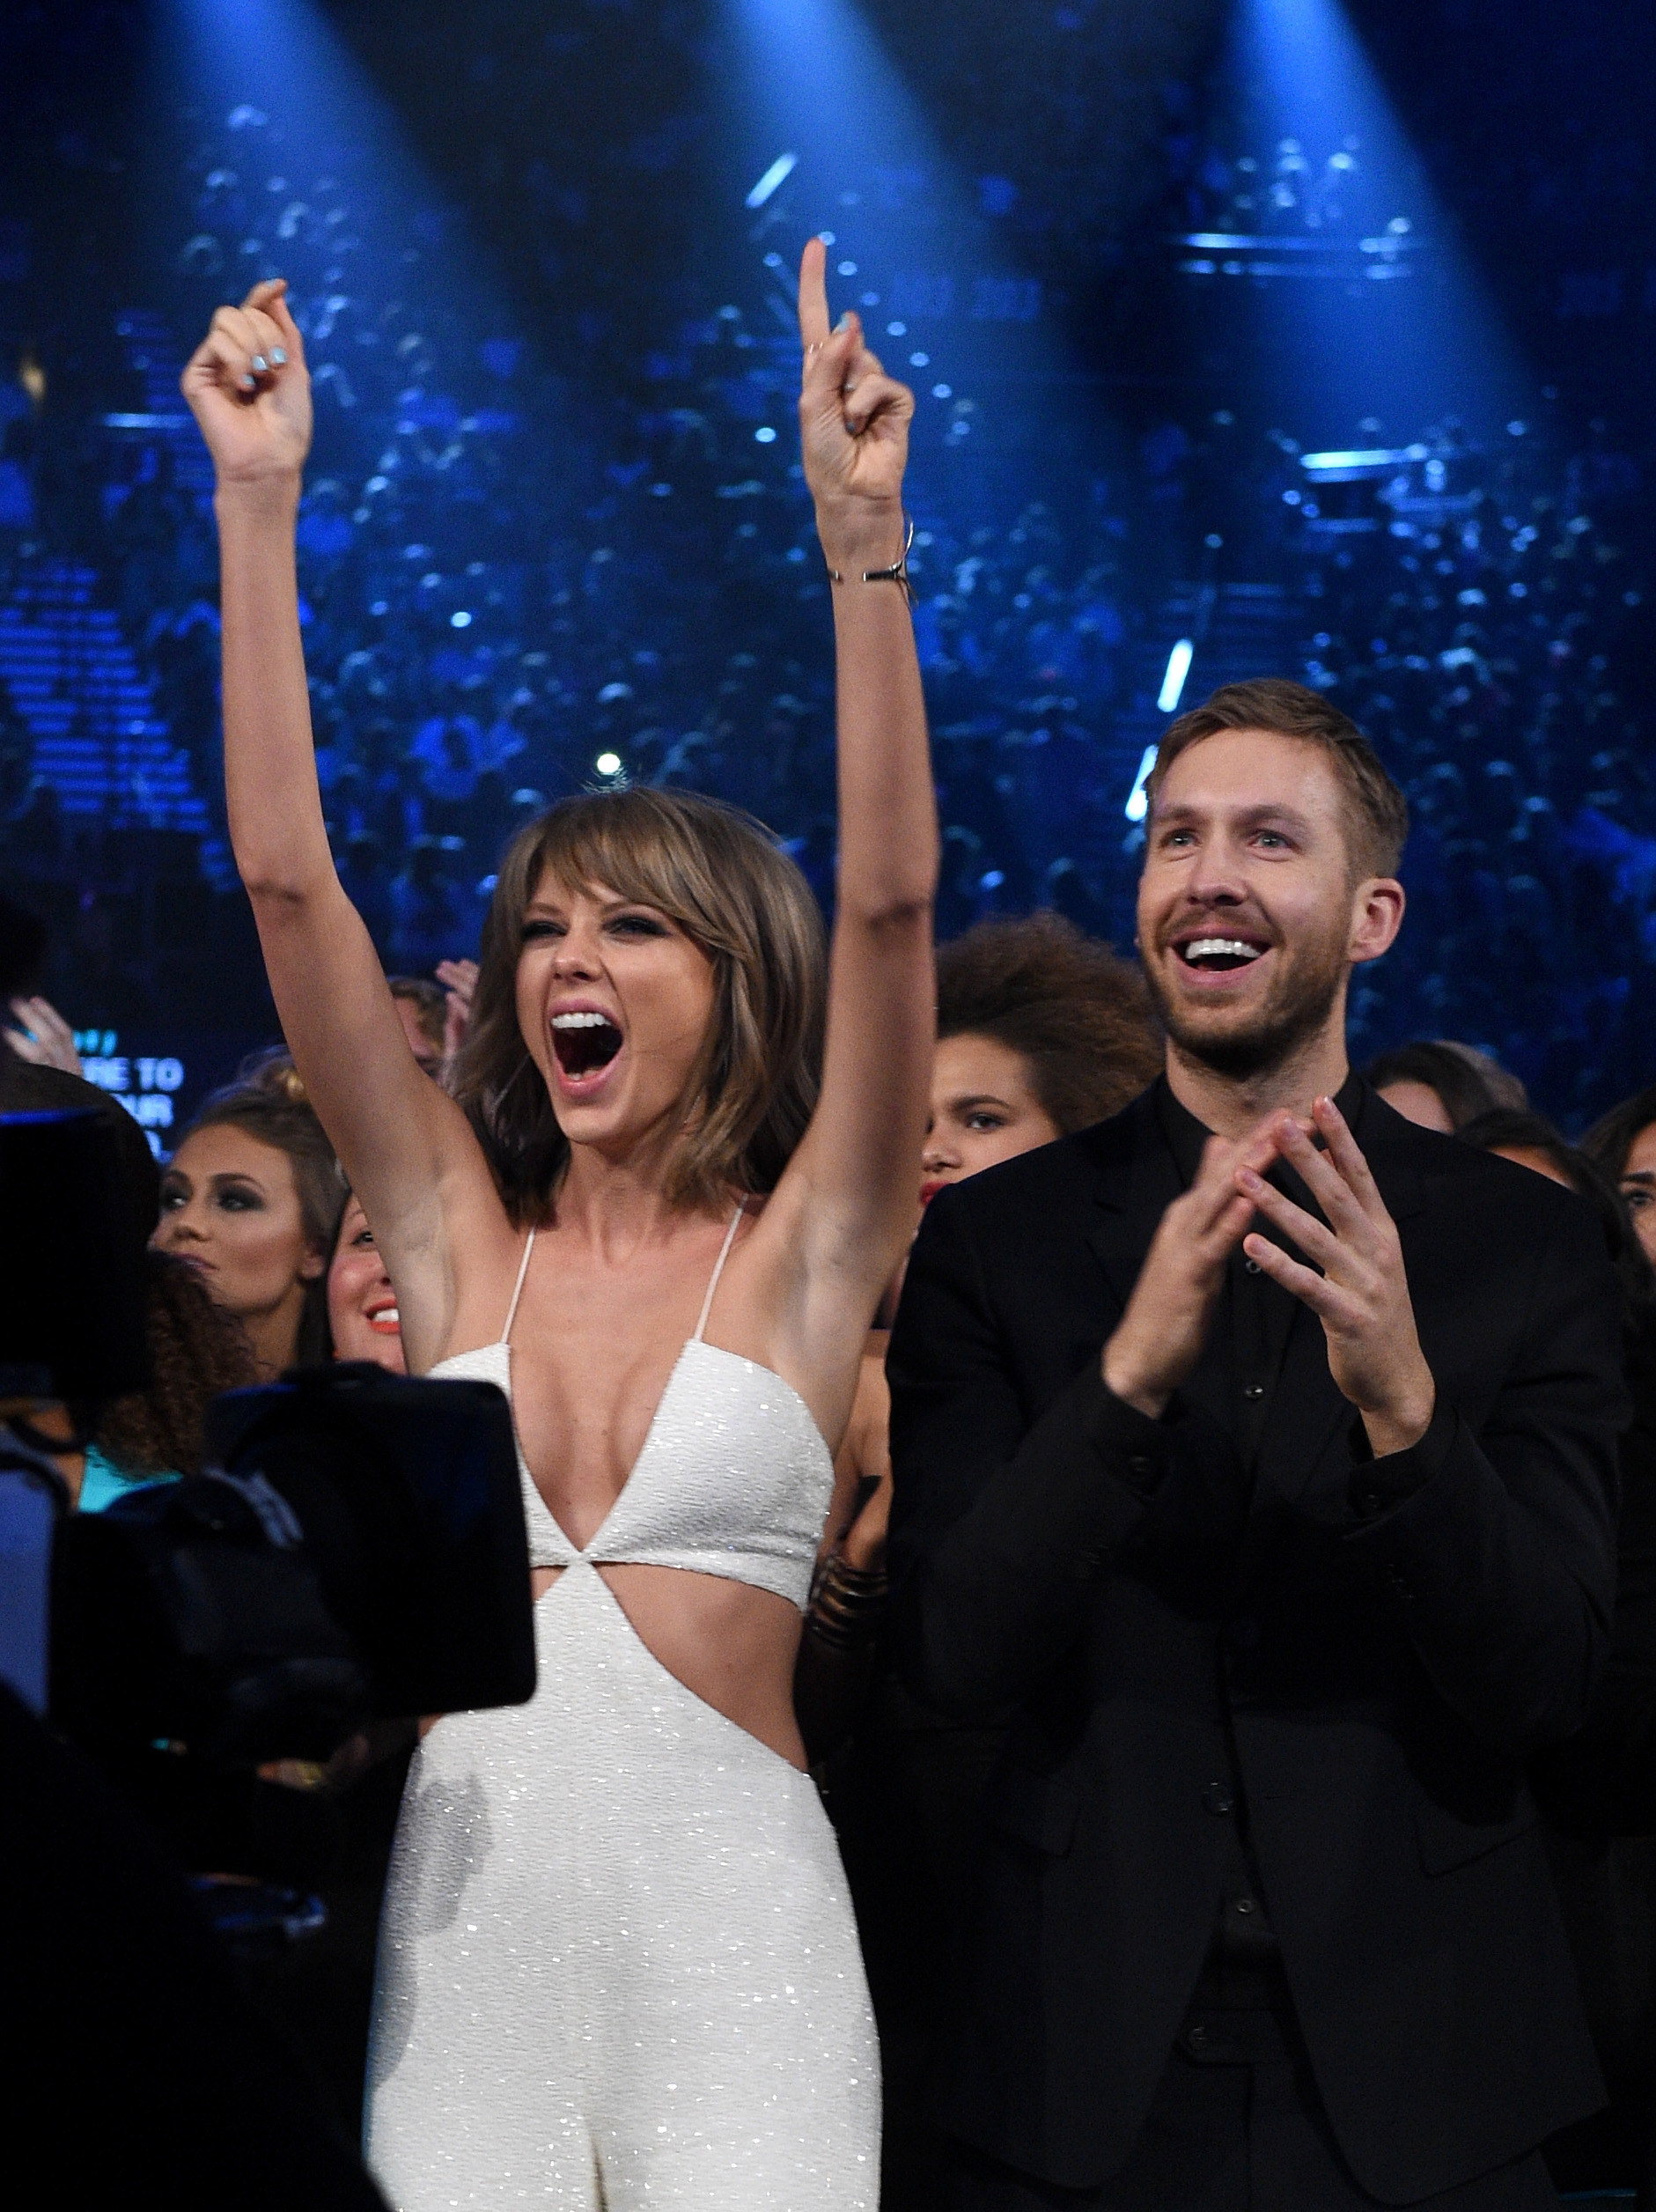 Taylor Swift and Calvin Harris stand side by side during an awards show, cheering and laughing